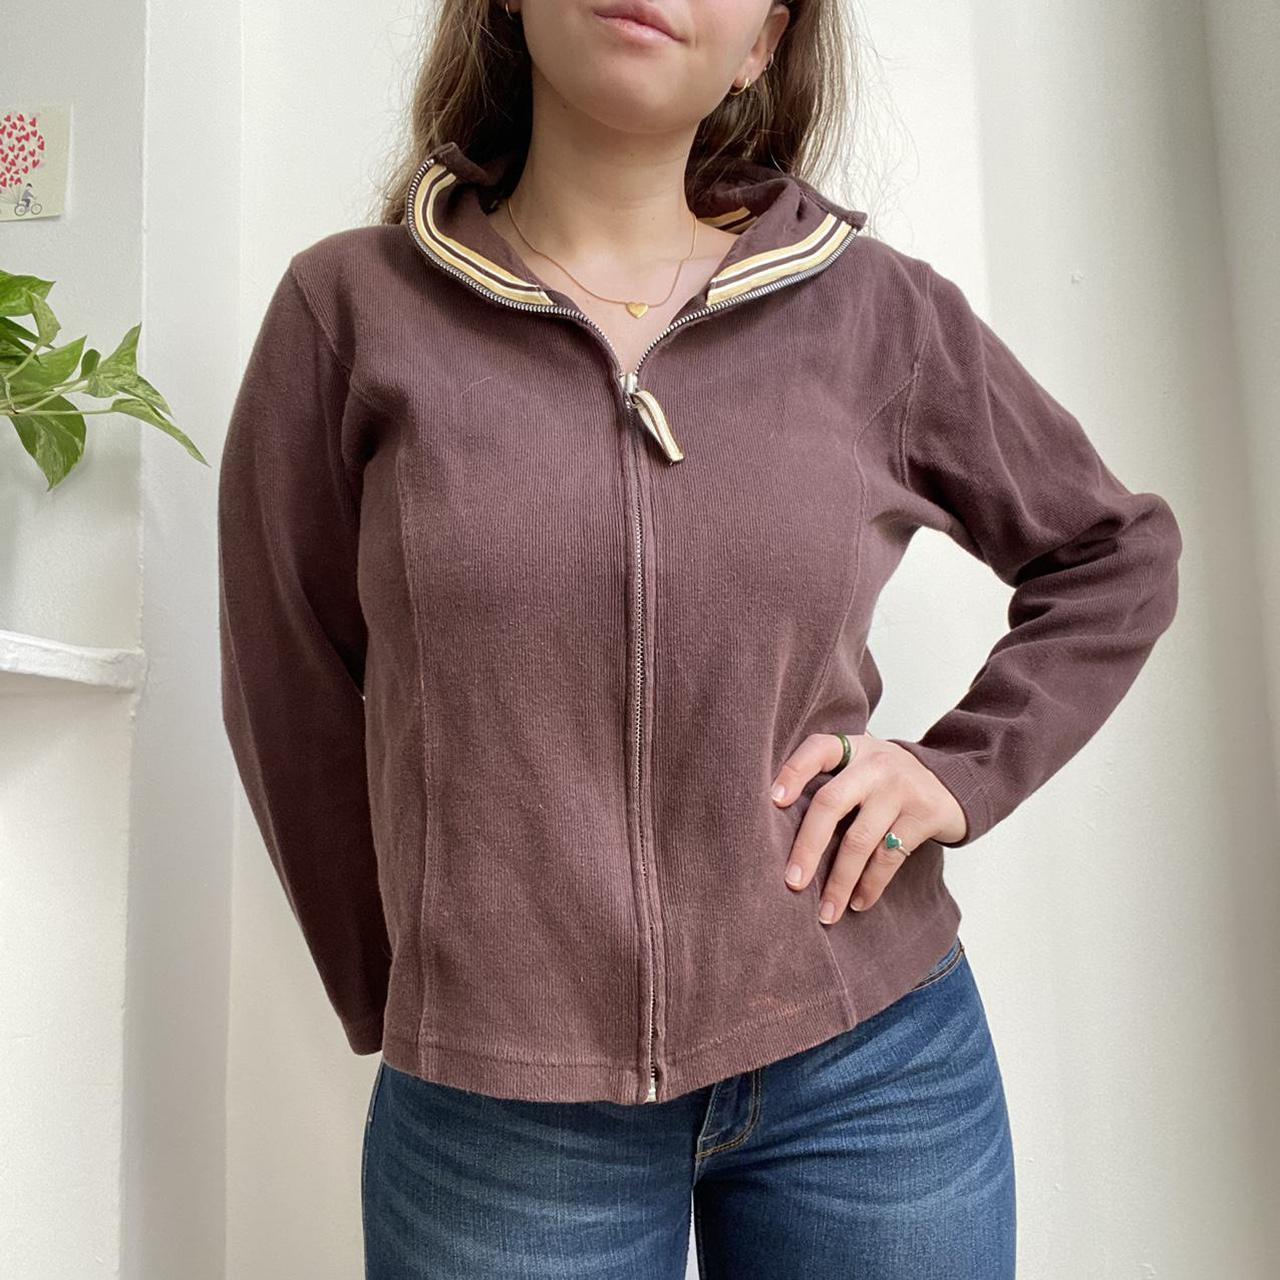 Product Image 1 - adorable brown zip up 2000’s